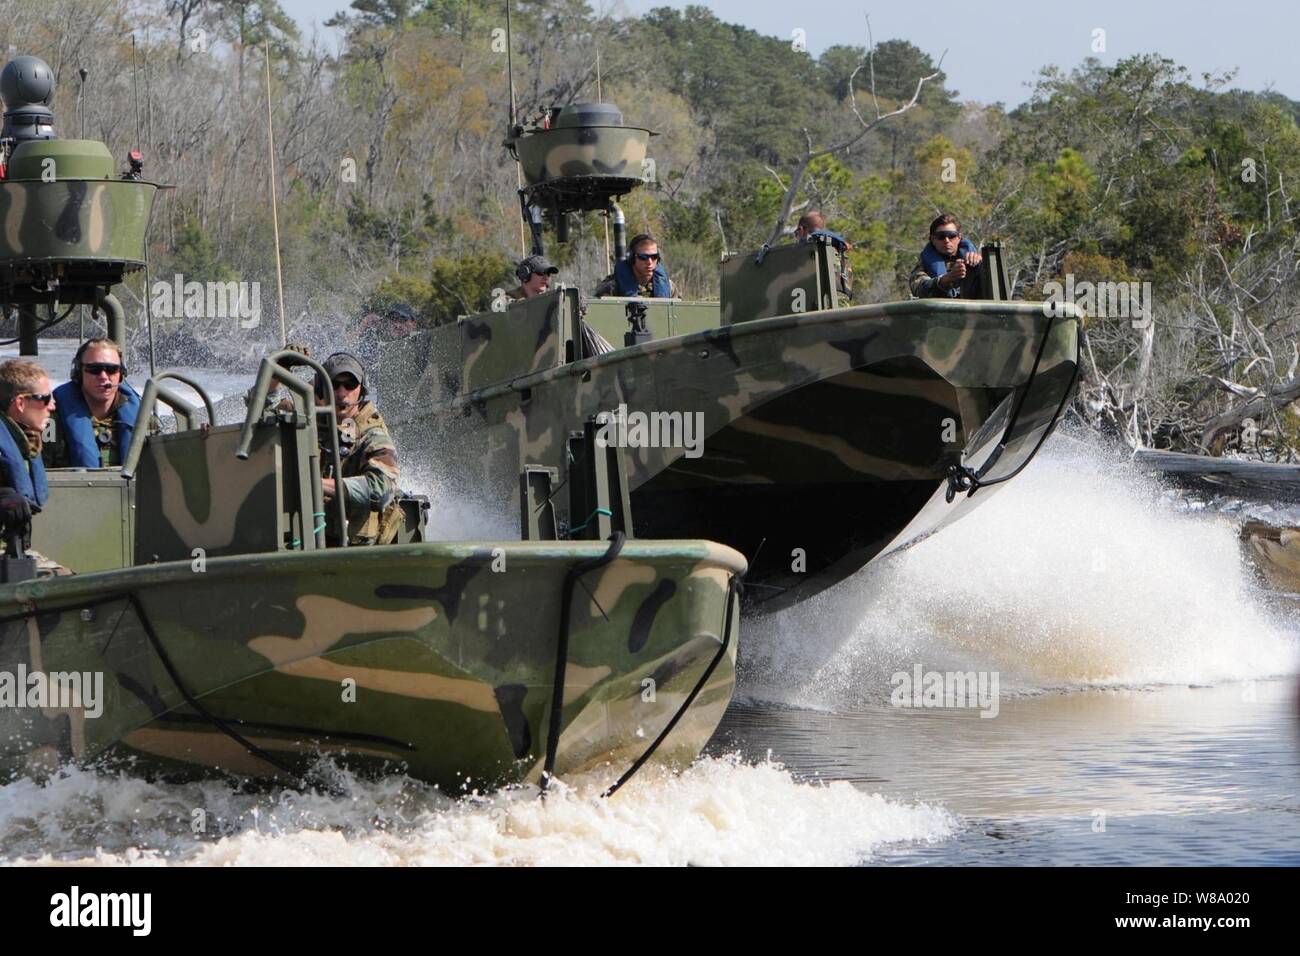 Sailors assigned to Riverine Squadron 3 and marines from the Royal Netherlands marine corps perform a right echelon maneuver in riverine assault boats during a three-week cross-training exercise to exchange tactics and refine skills at Camp Lejeune, N.C., on March 22, 2011. Stock Photo